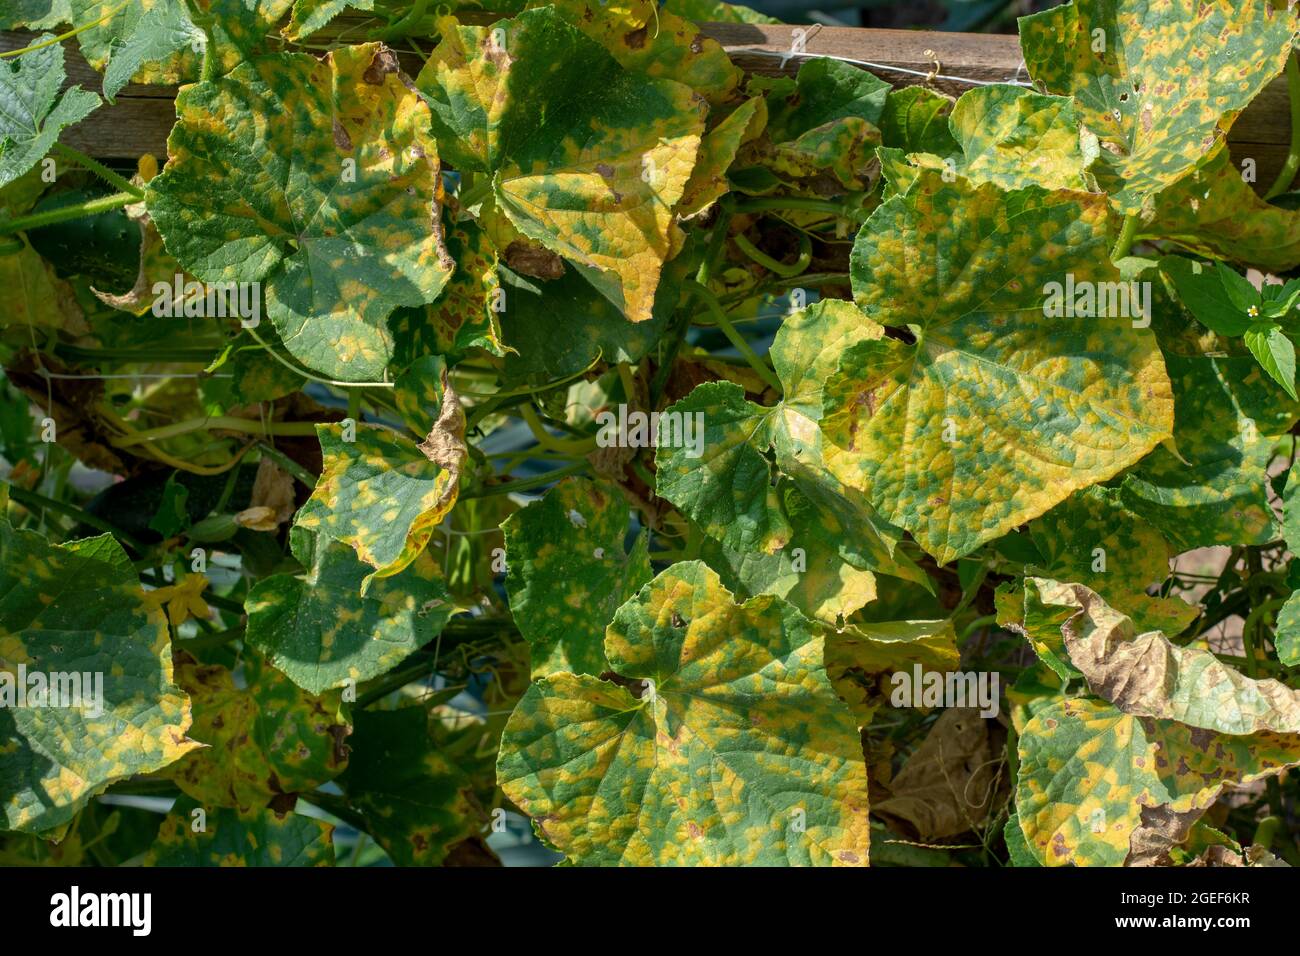 Cucumber leaves infected by downy mildew (Pseudoperonospora cubensis) in the garden. Cucurbits disease. Stock Photo